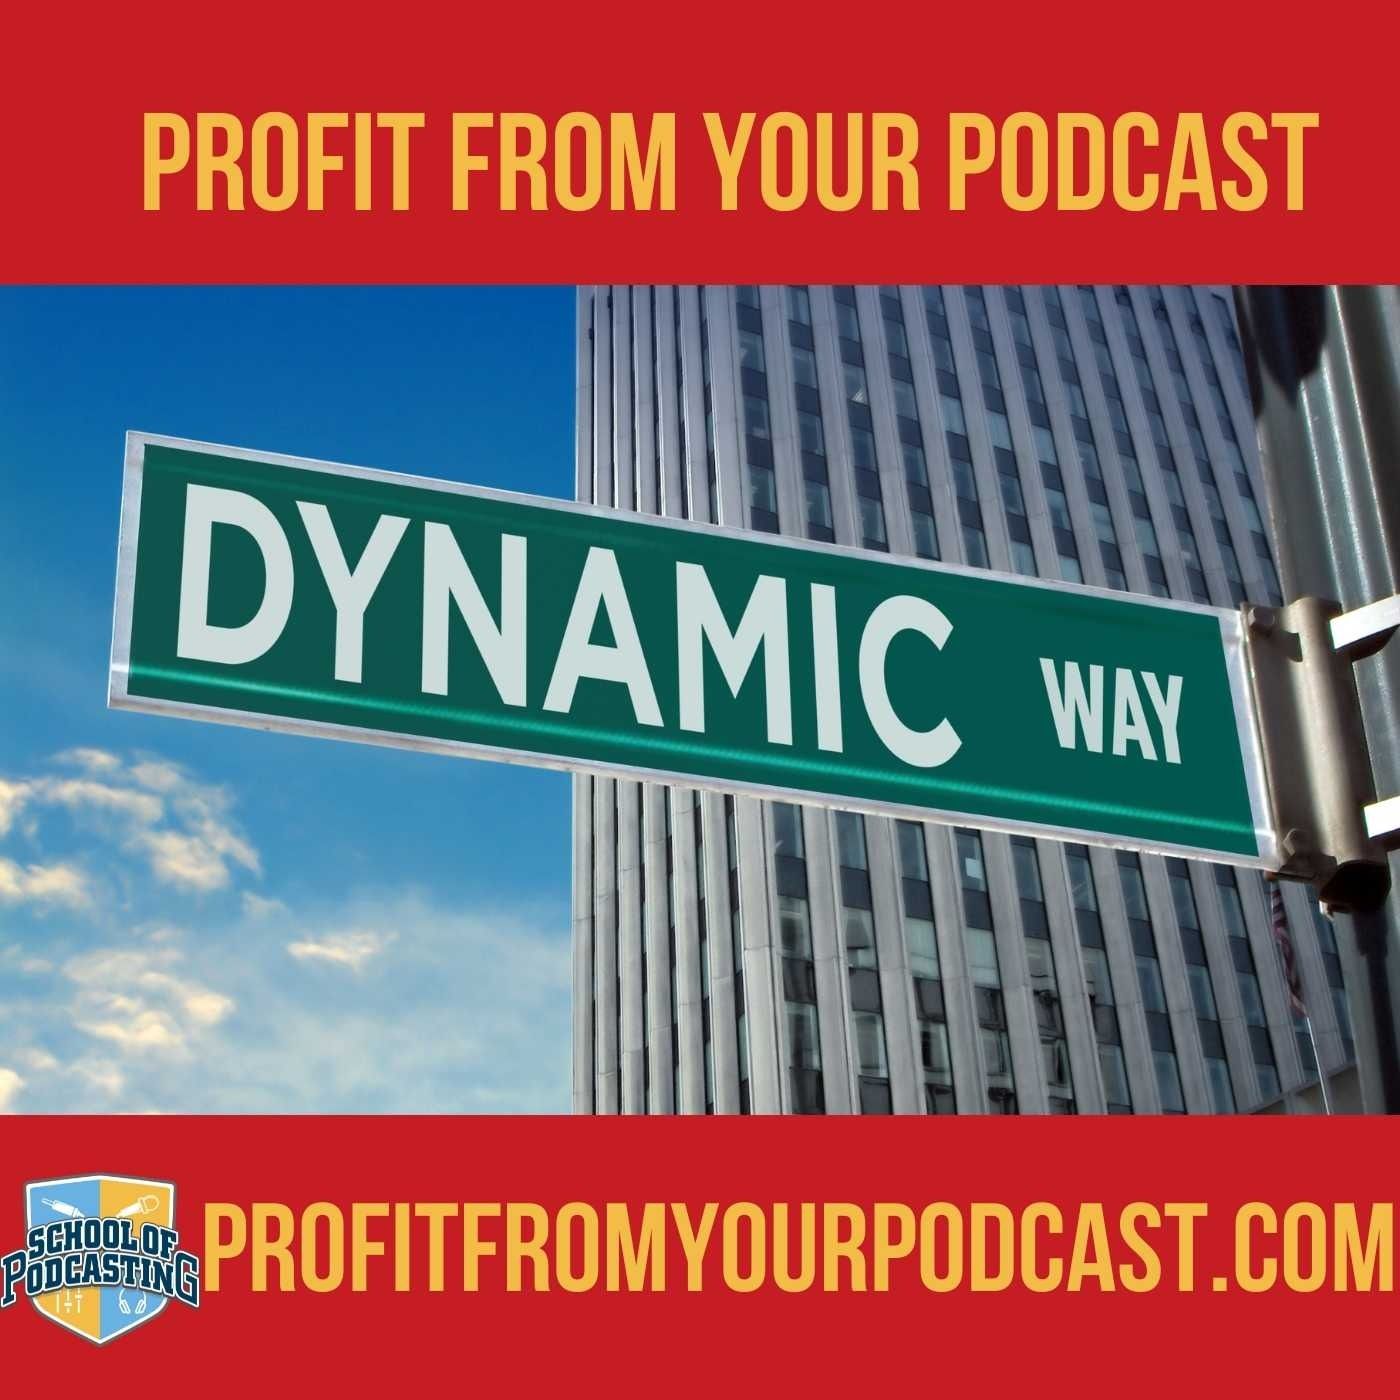 Artwork for podcast Profit From Your Podcast